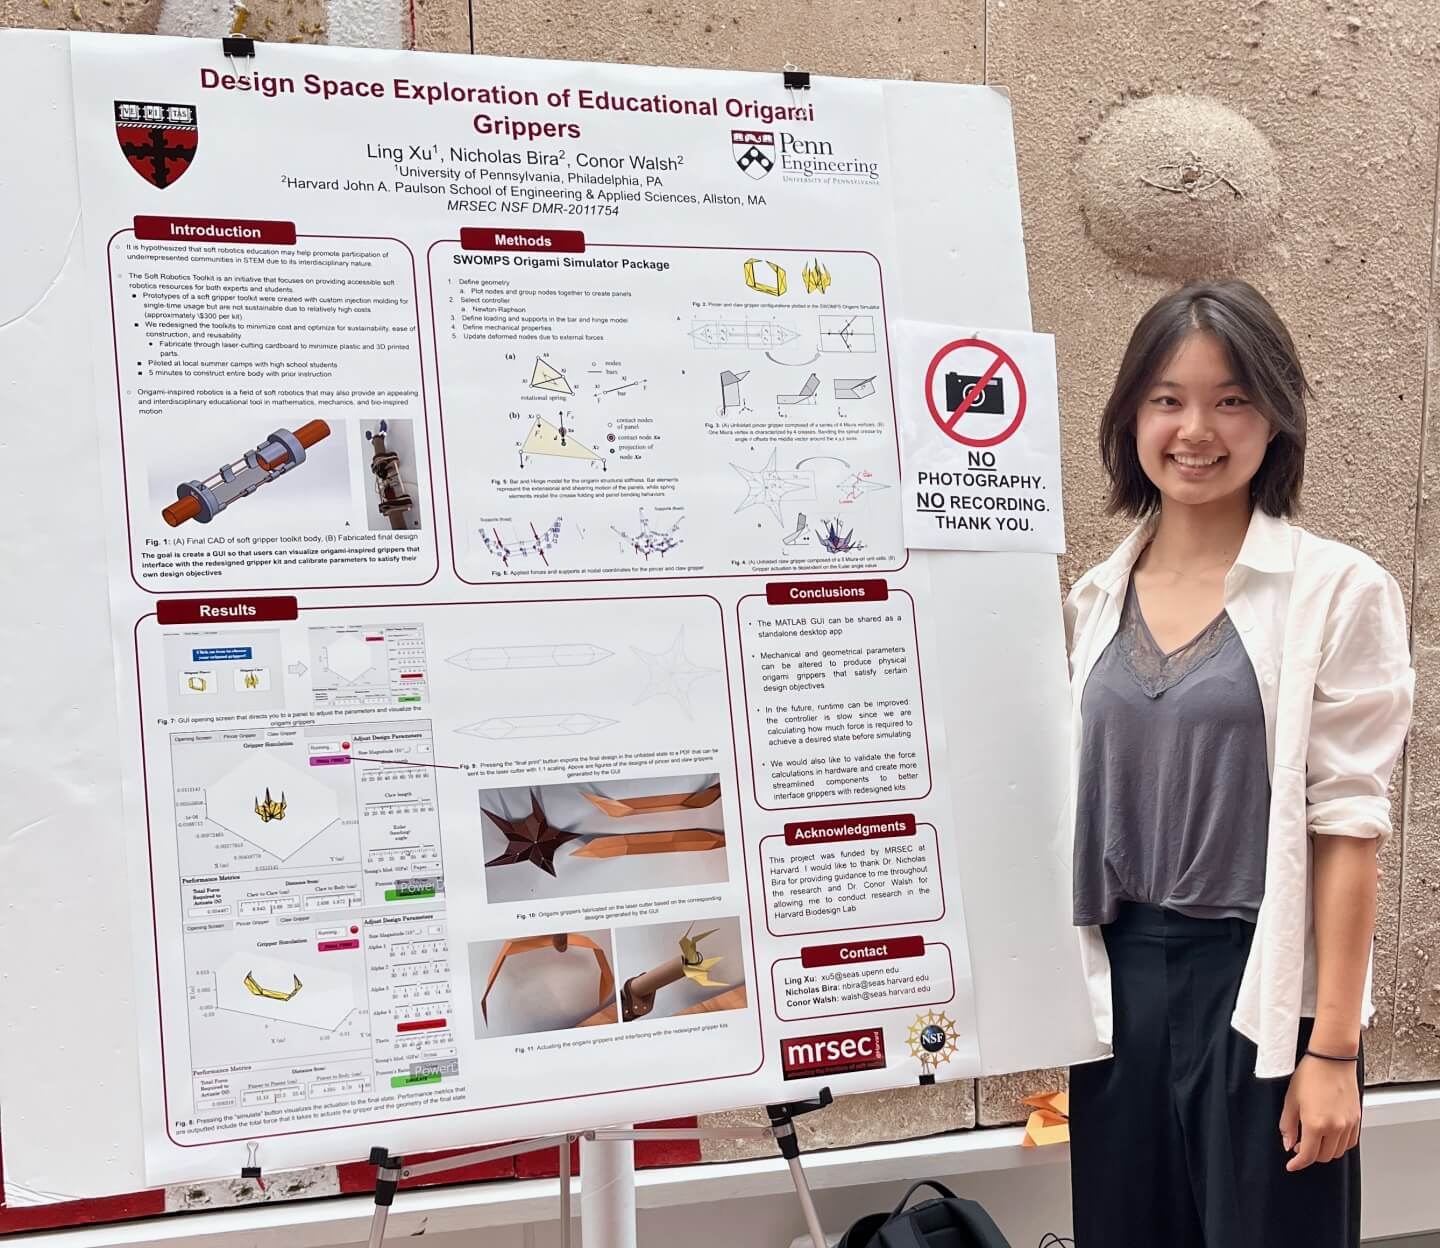 Ling Xu, a rising senior mechanical engineering and applied mechanics major at the University of Pennsylvania, with her REU research poster